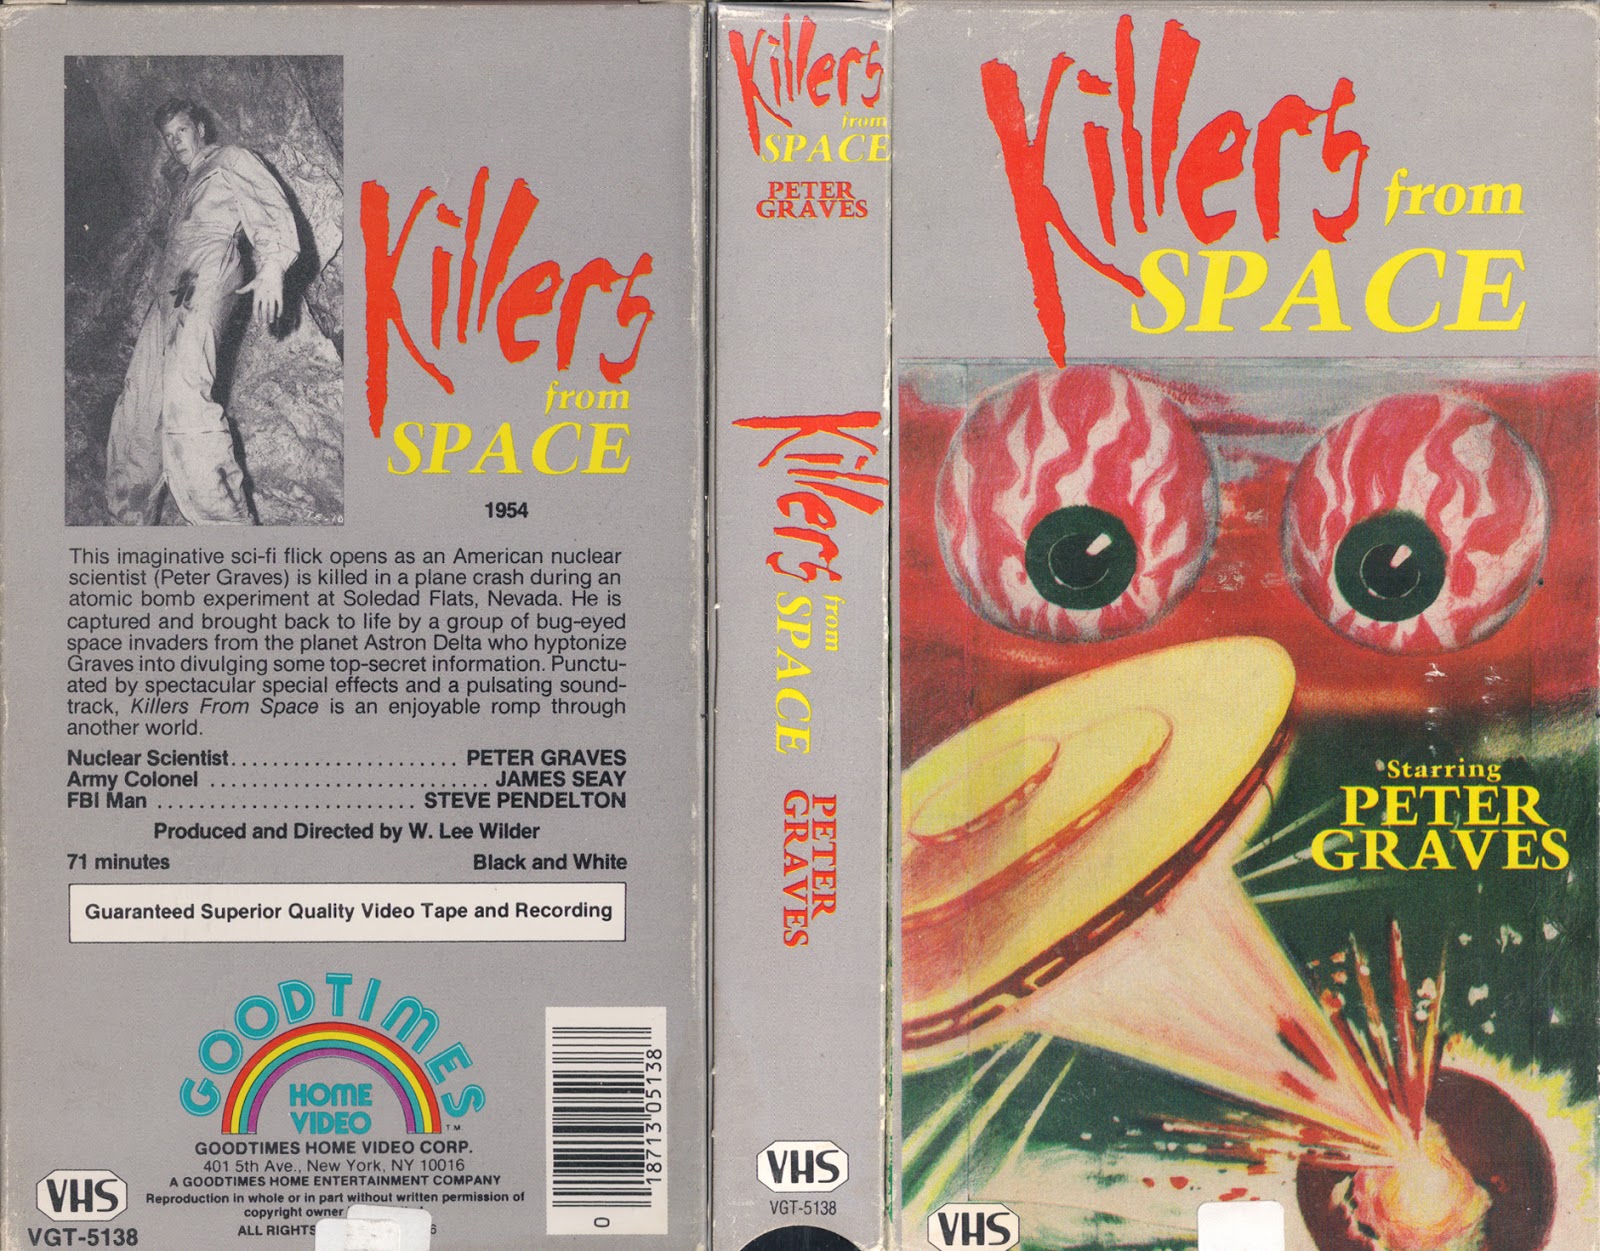 Killers From Space #3